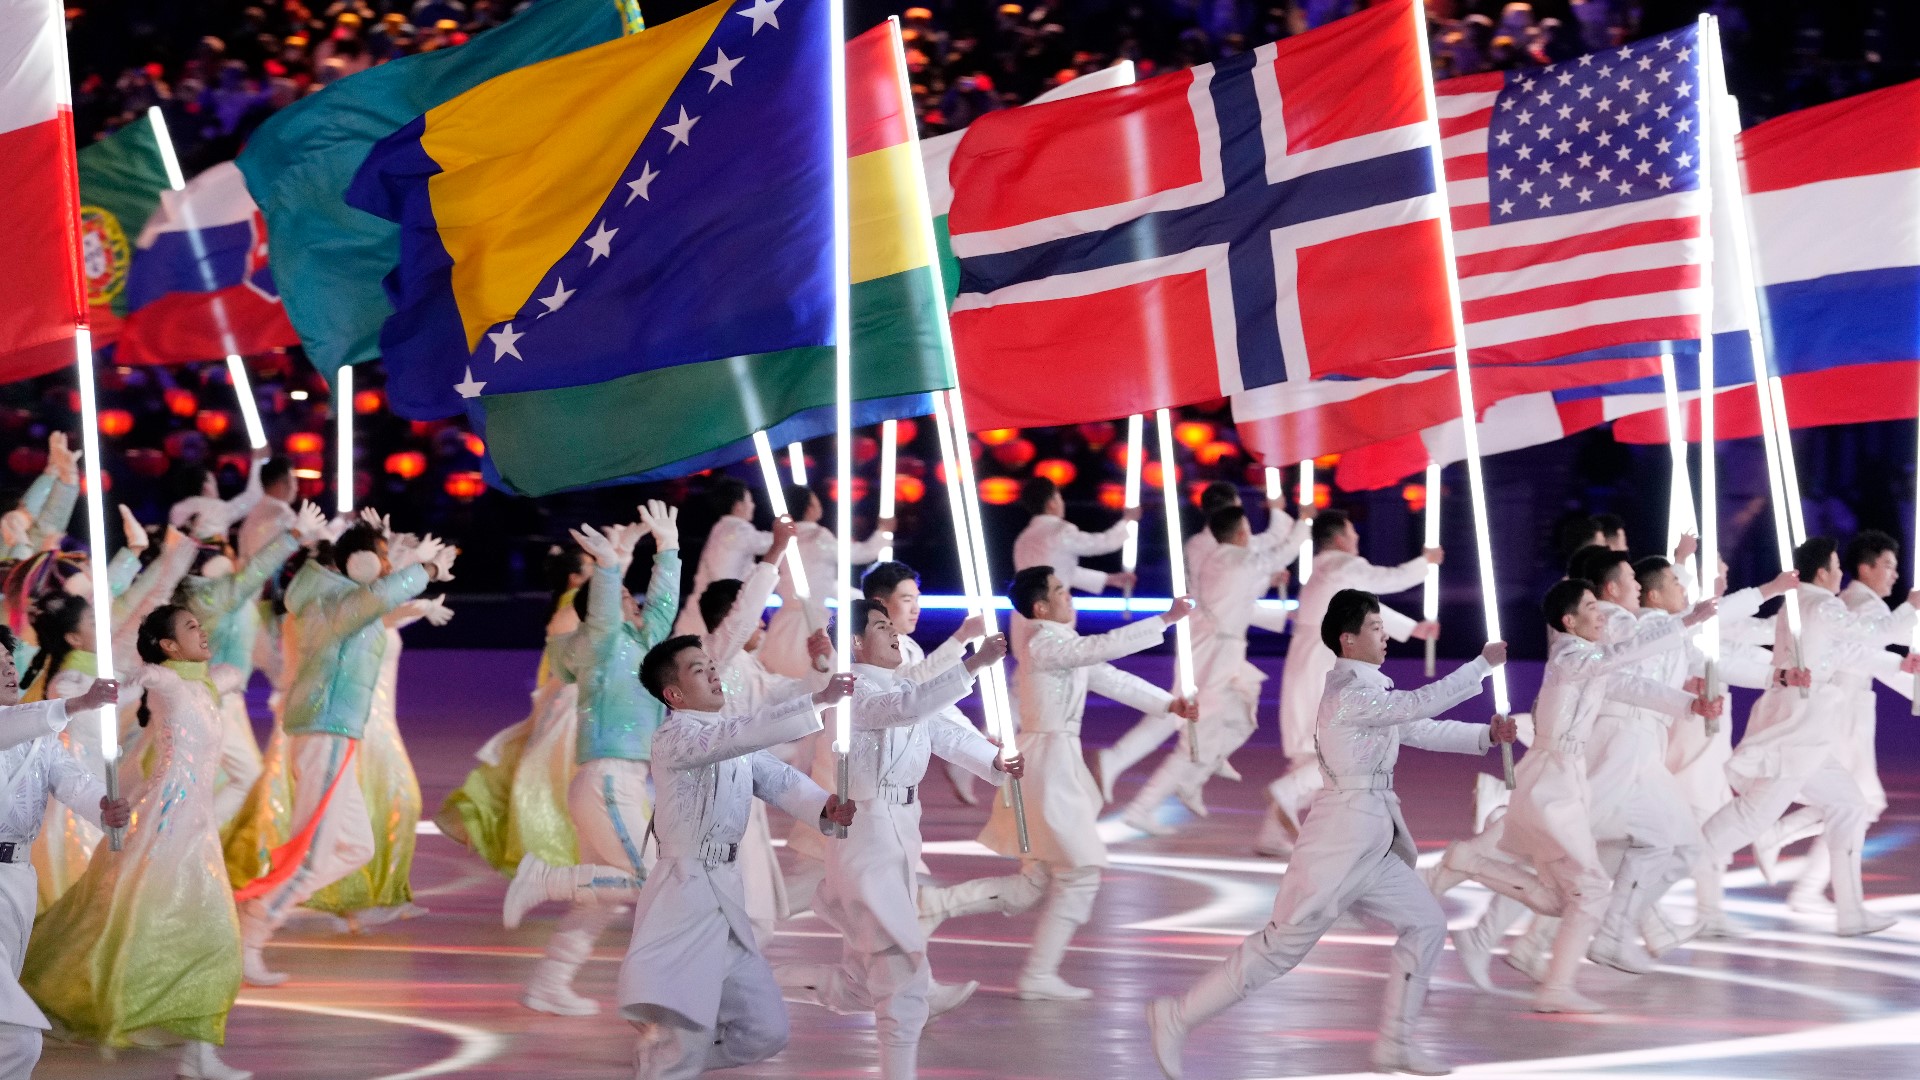 A Closing Ceremony bursting with color and energy officially wrapped up the 2022 Winter Olympics.